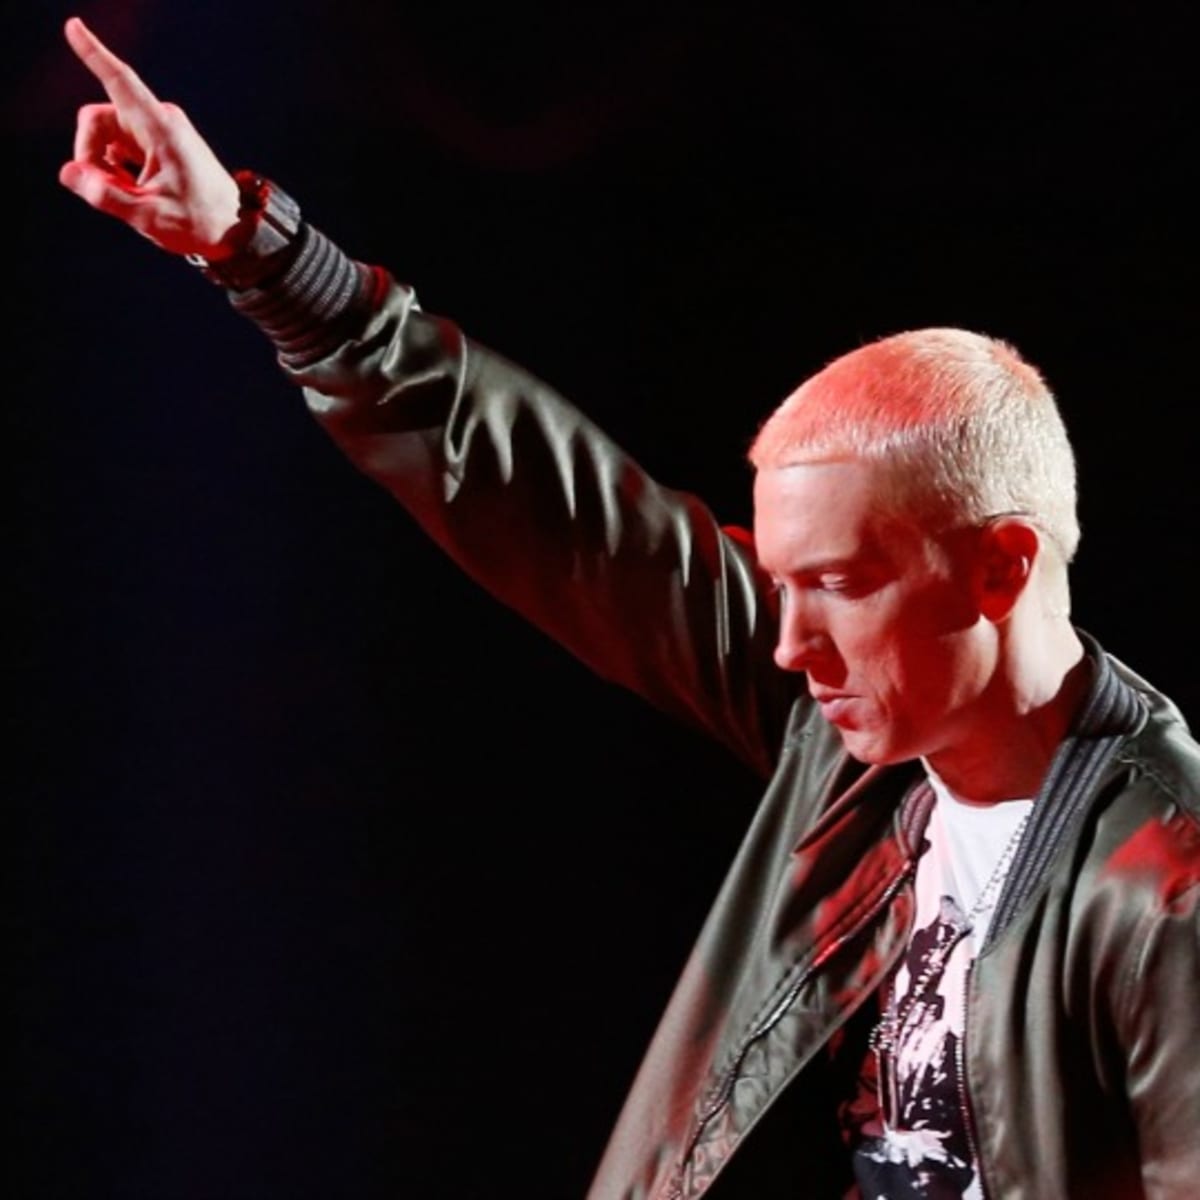 Detroit Tigers selling Eminem jerseys on Opening Day - Sports